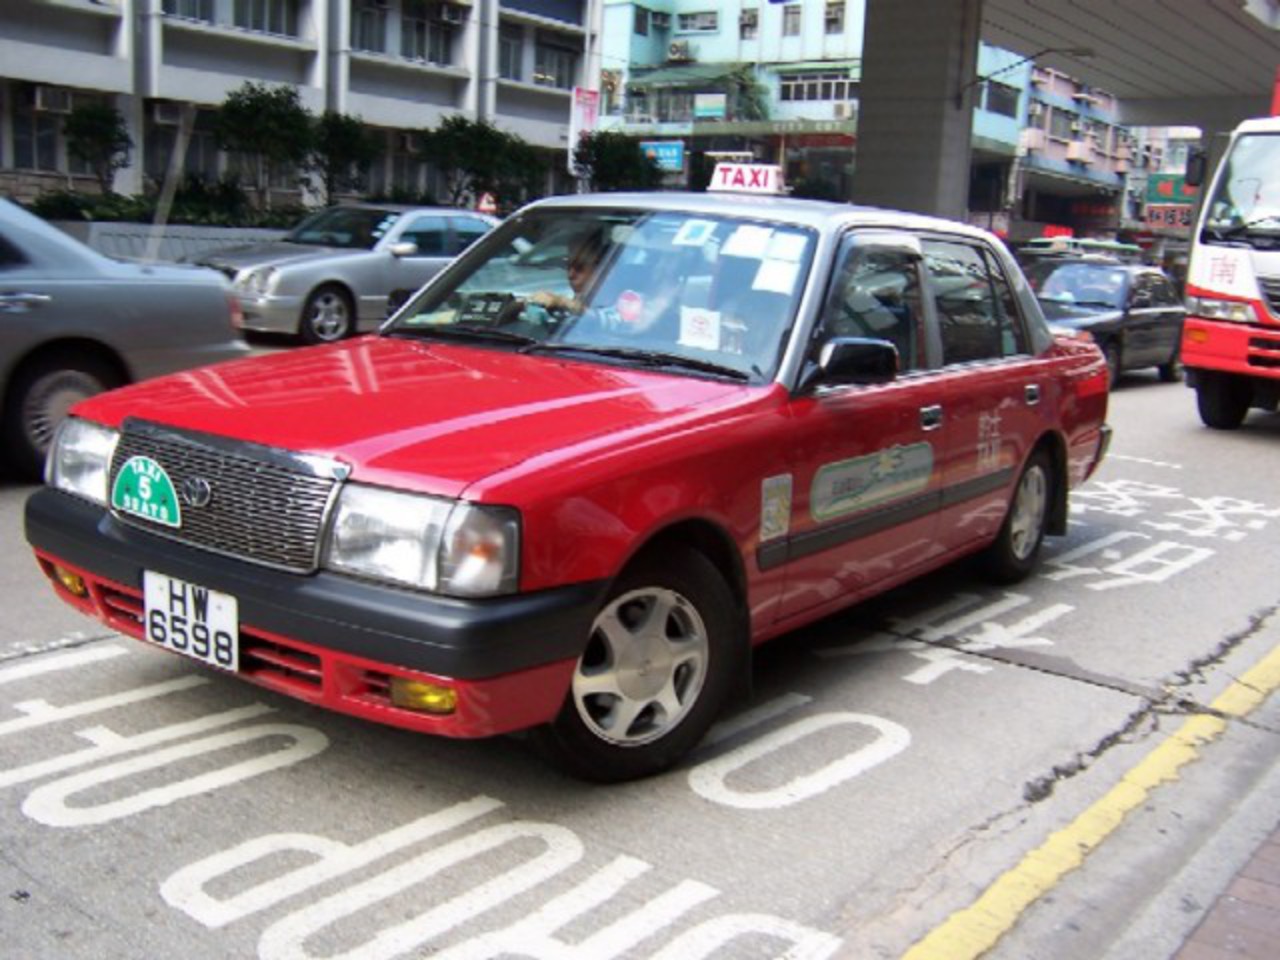 And the Toyota LPG taxi bears all the hallmarks you'd expect from Hong